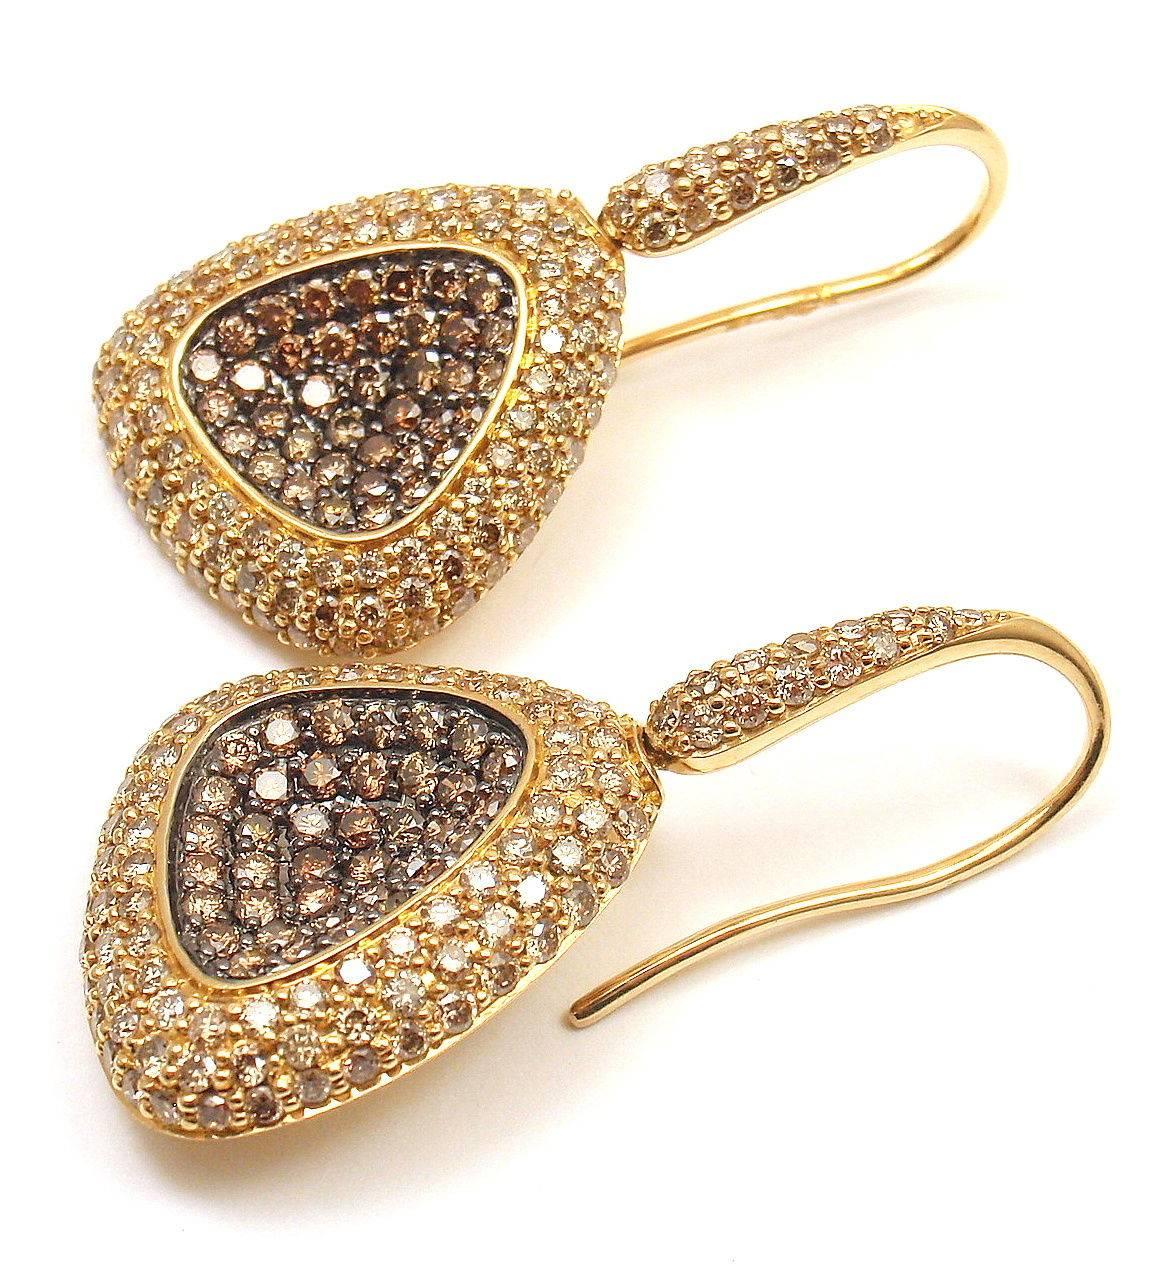 18k Yellow Gold Cognac Diamond Capri Plus Drop Earrings by Roberto Coin. 
With Round Brilliant Cut Diamonds, White and Cognac, approx 3.771ct 

Details: 
Measurements: 1.25 inches long  by .75 inches wide
Weight: 13.2 grams 
Stamped Hallmarks: